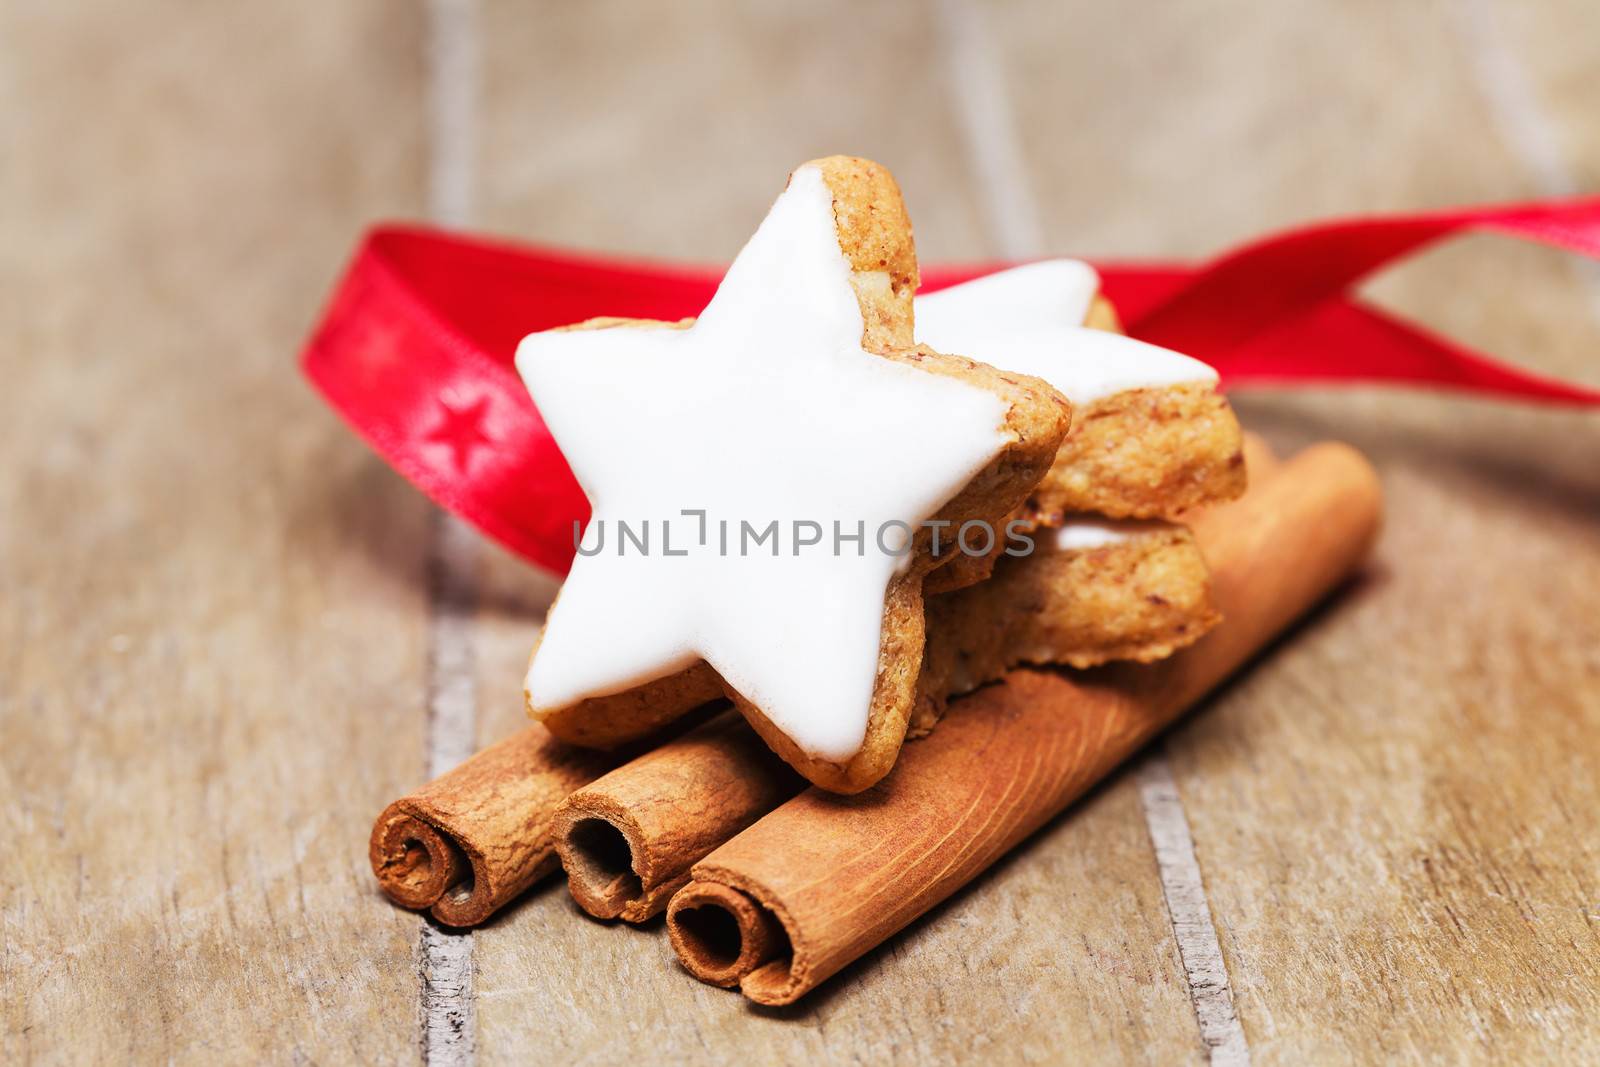 cinnamon star on cinnamon sticks with a red ribbon on wooden background